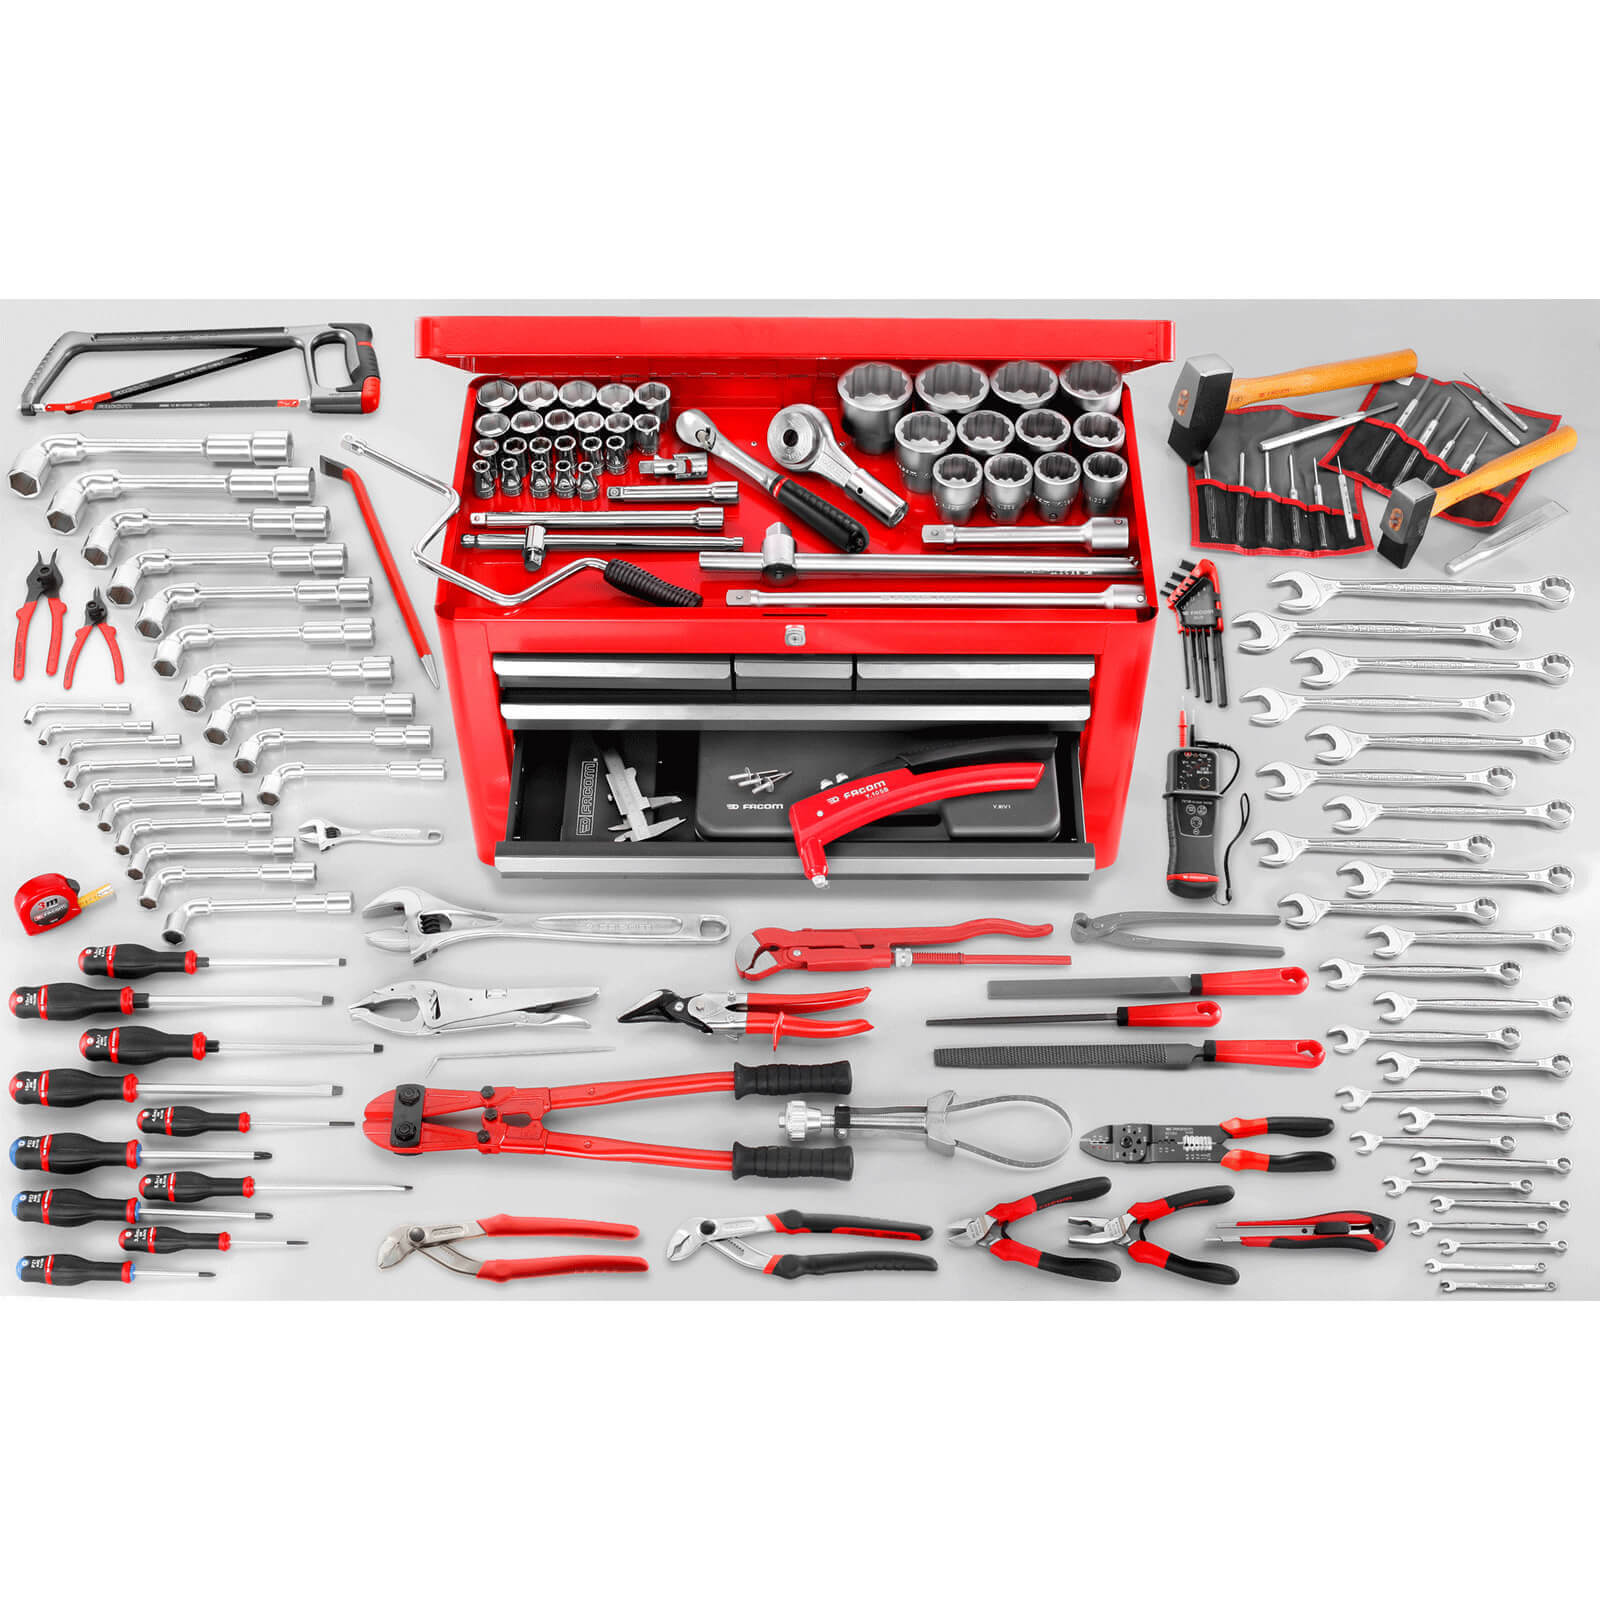 Image of Facom 5 Drawer Tool Chest + 160 Piece Tool Kit Red